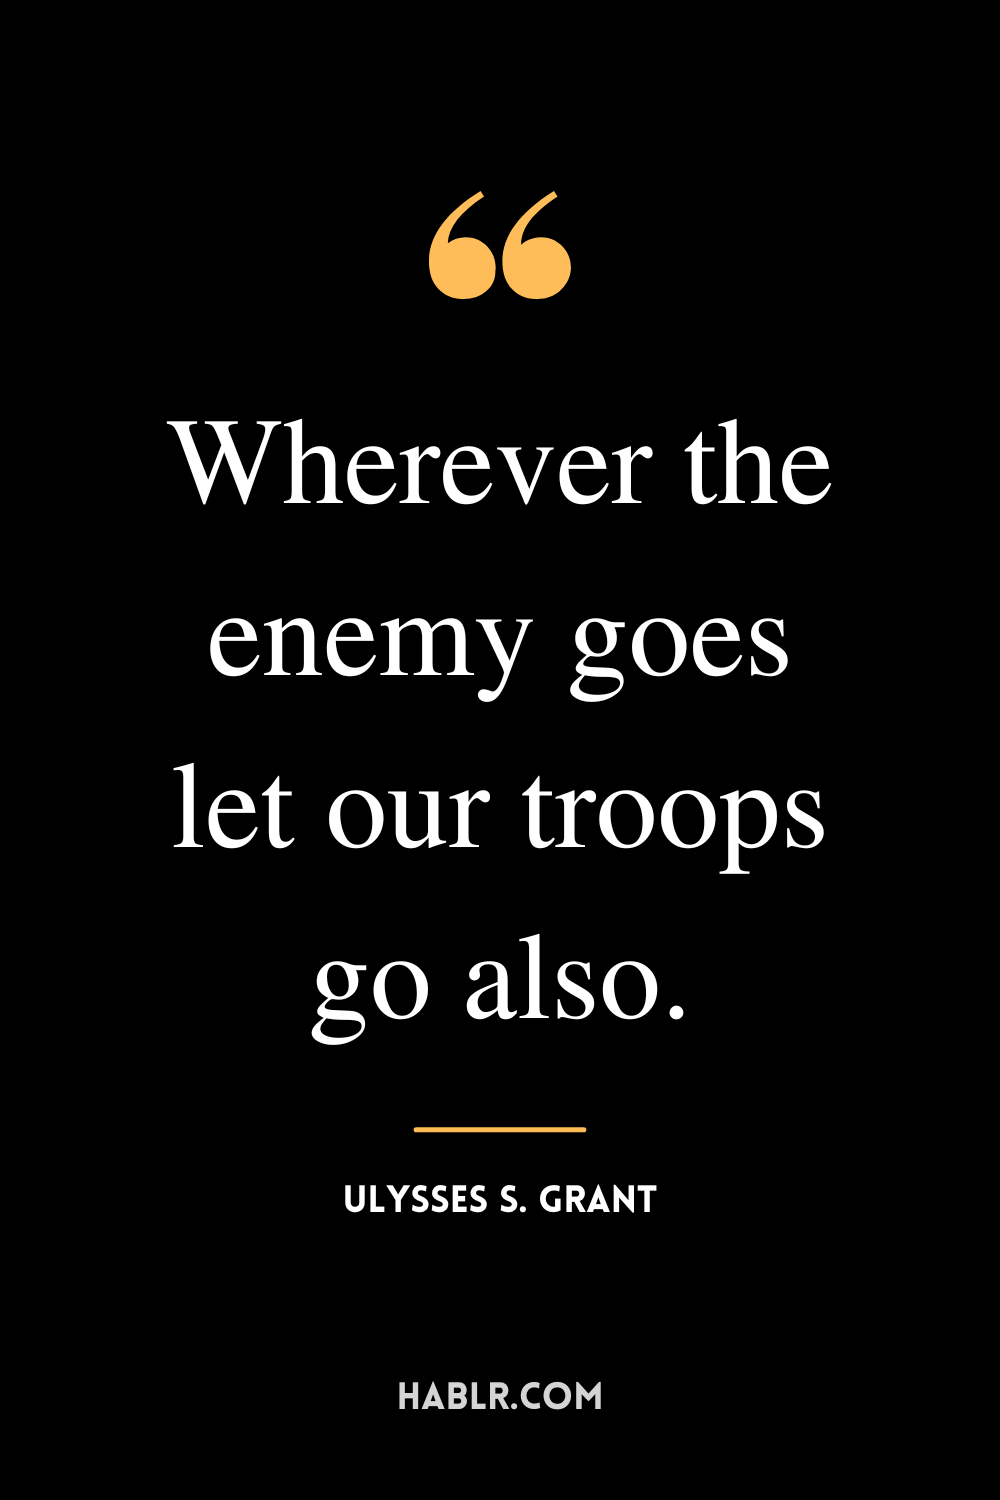 “Wherever the enemy goes let our troops go also.” -Ulysses S. Grant